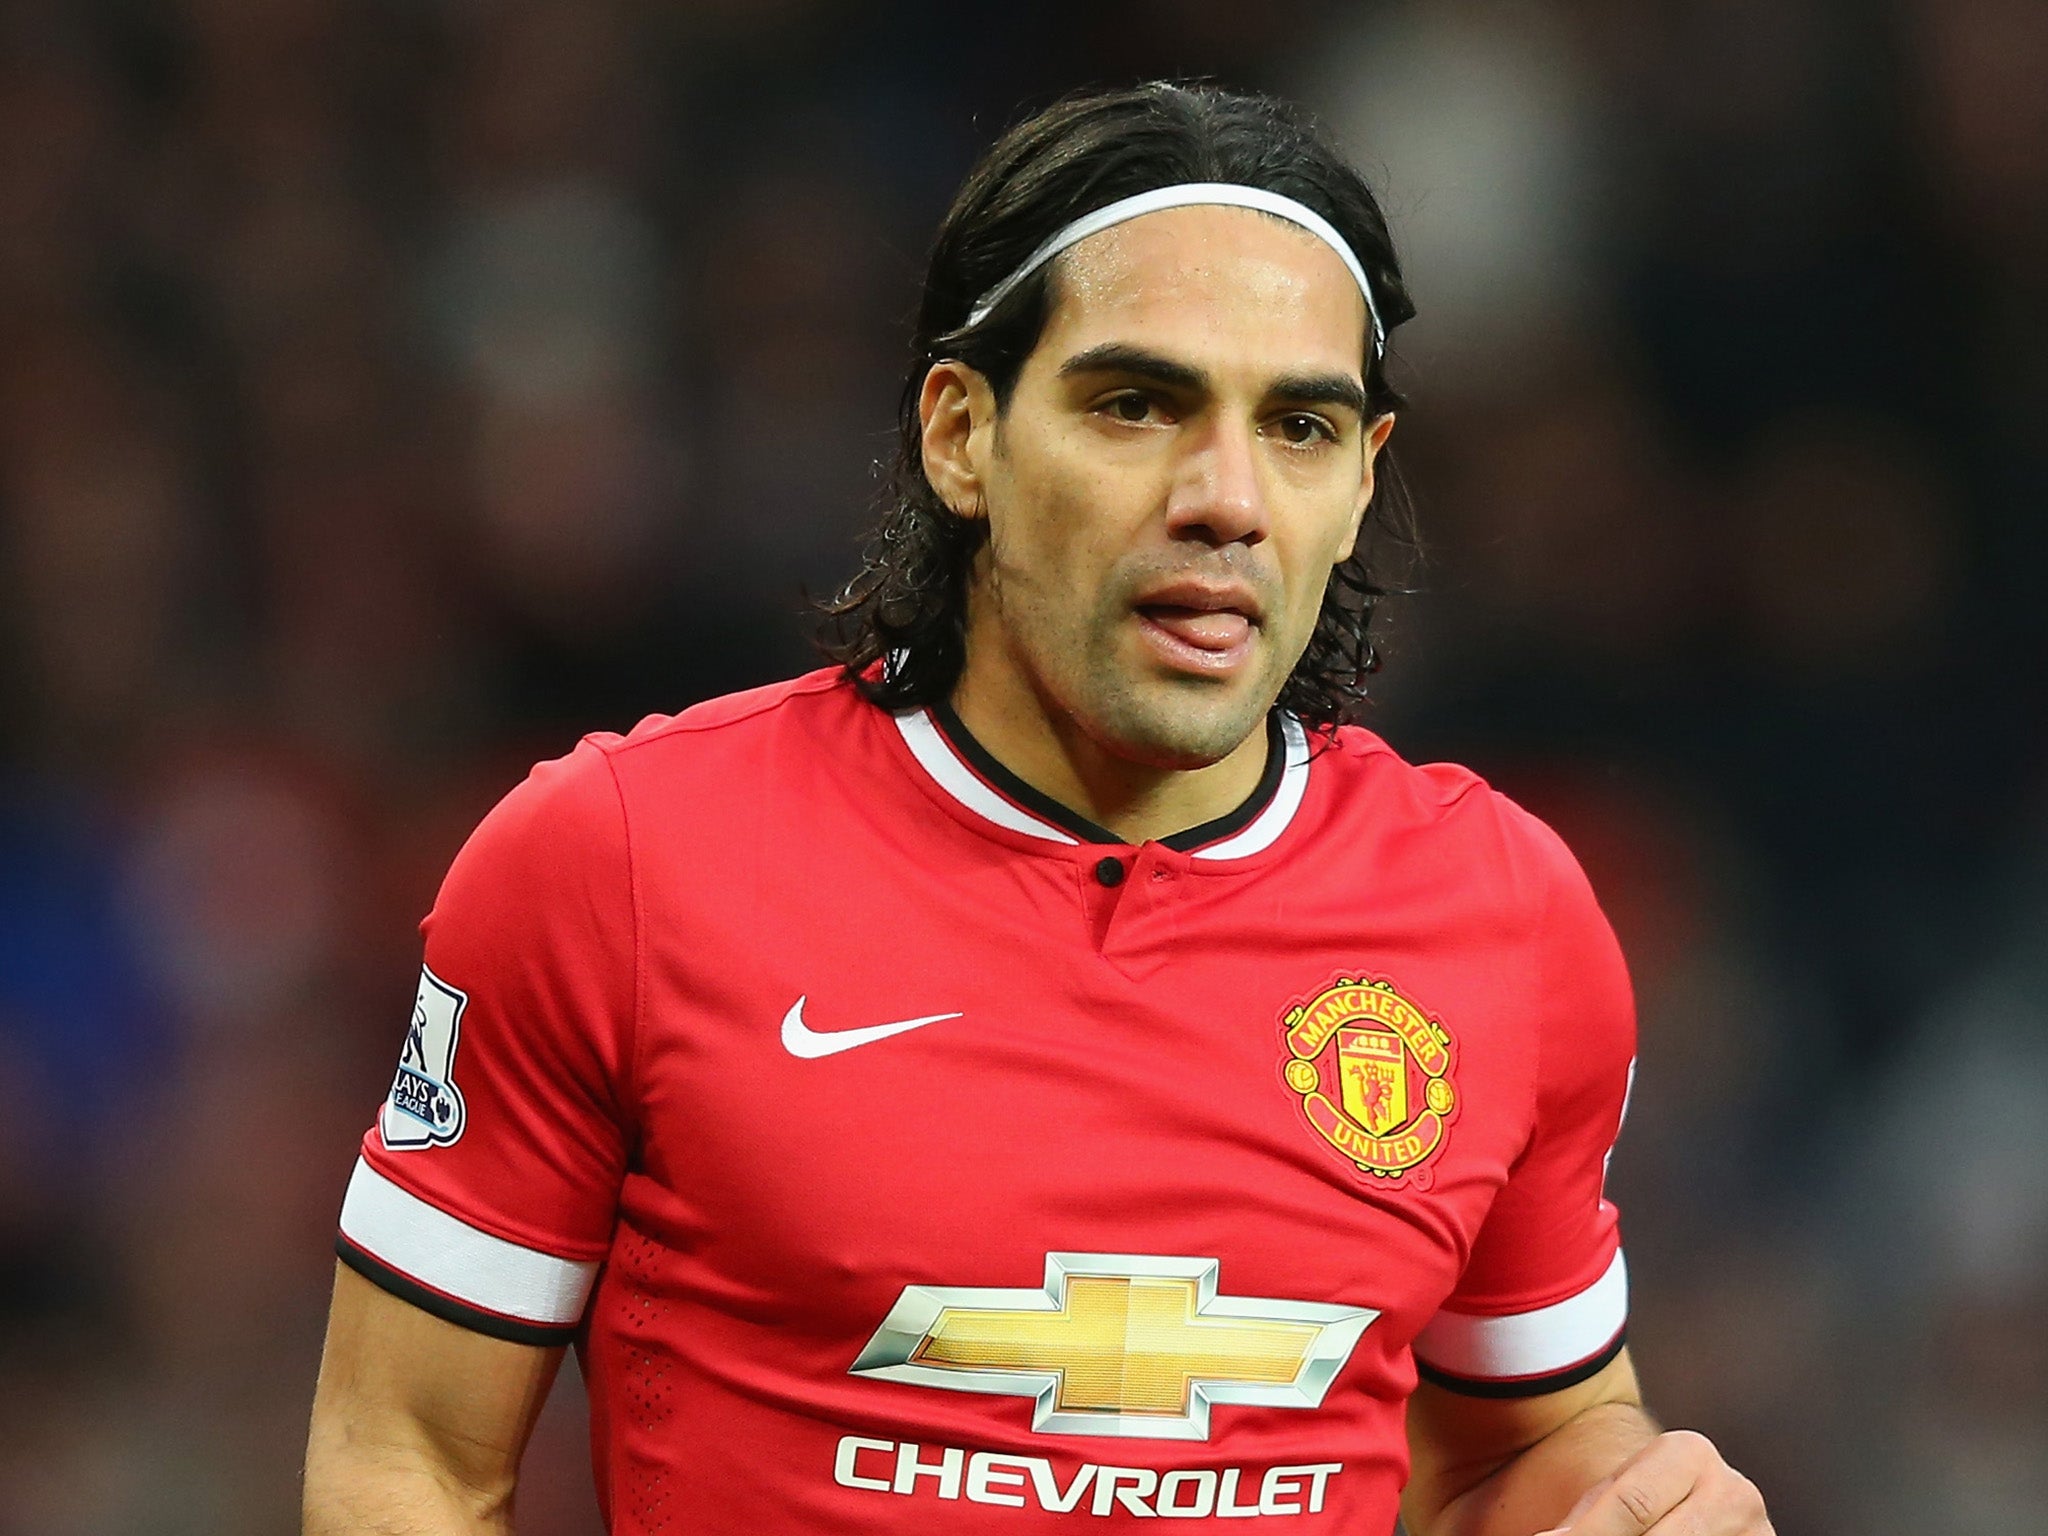 Radamel Falcao in action for Manchester United